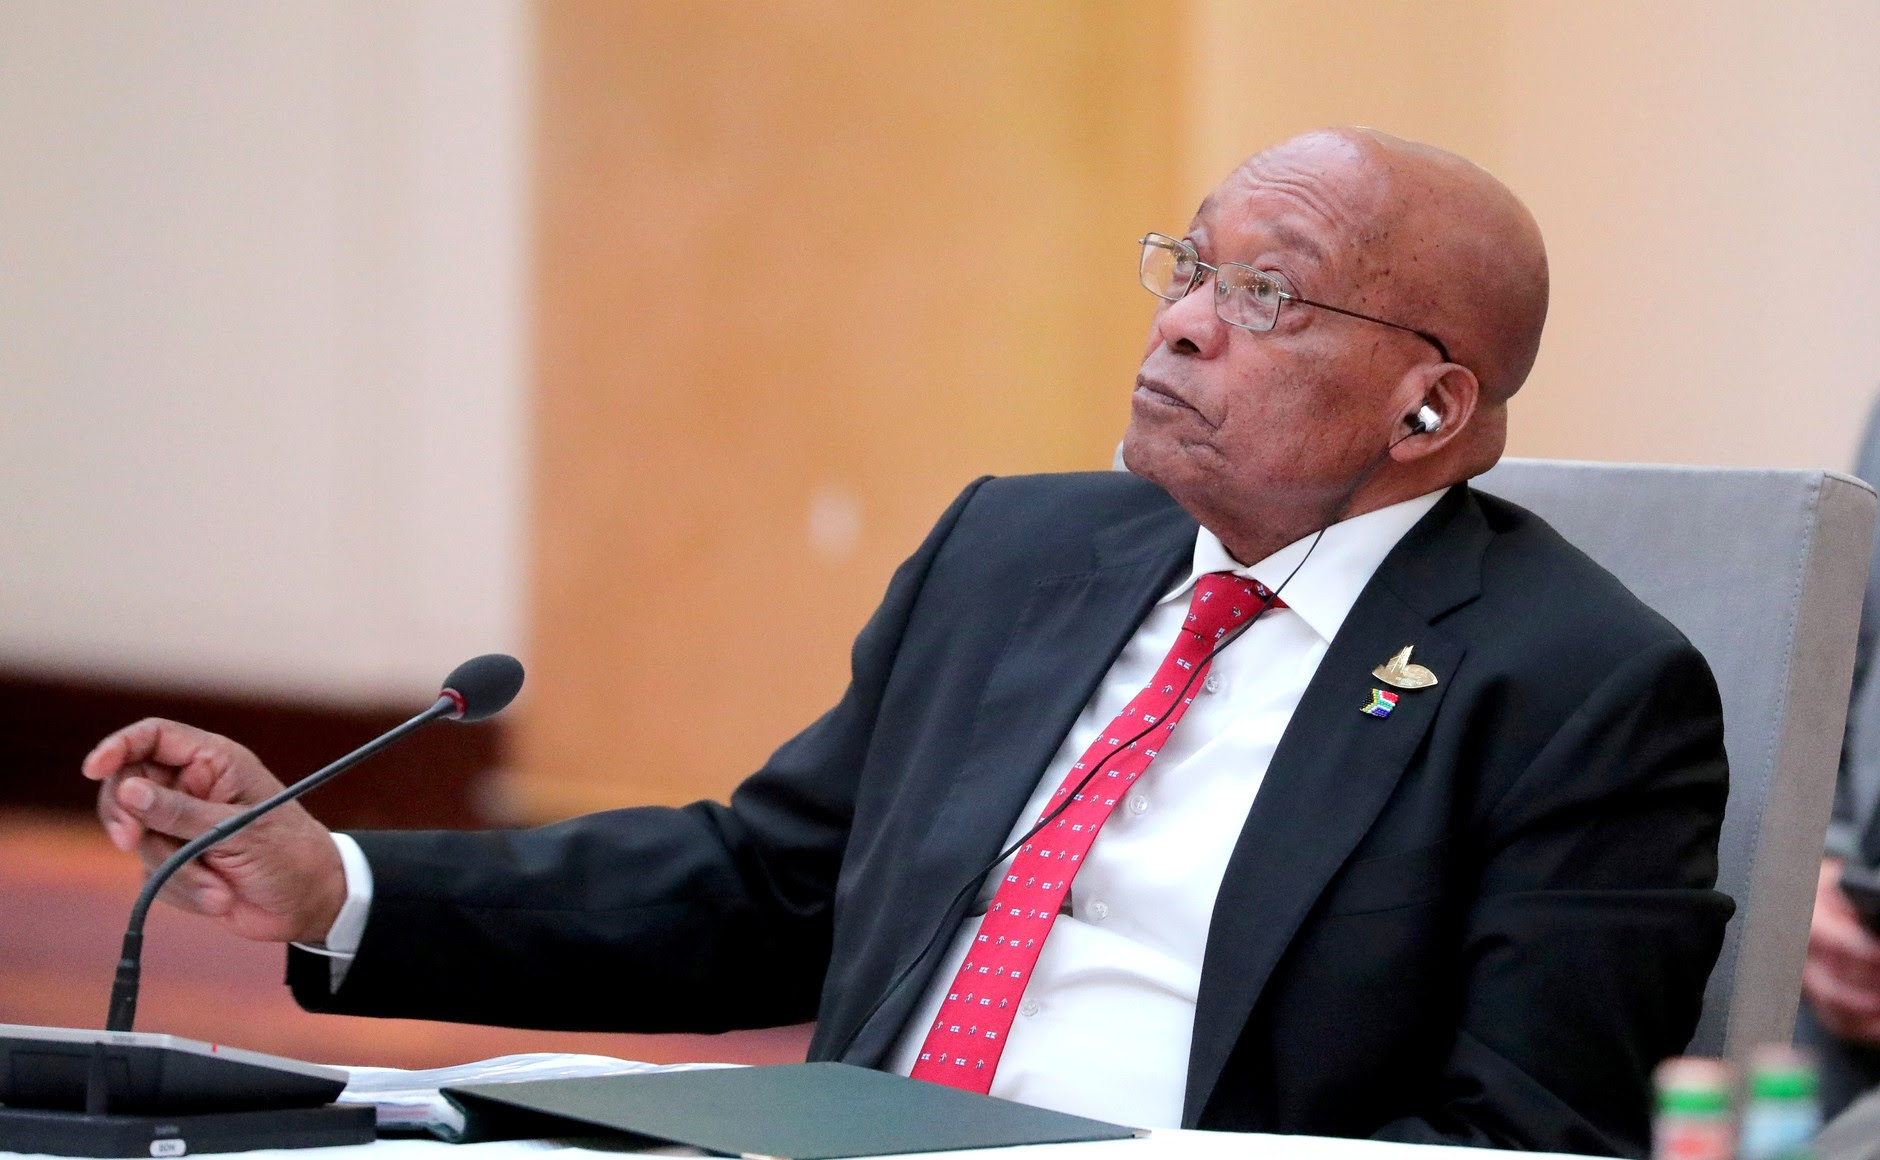 Former South African President Jacob Zuma, who faces trial this week on corruption charges, attended the G20 summit in Hamburg, Germany, in July 2017. (Photo: Kremlin)